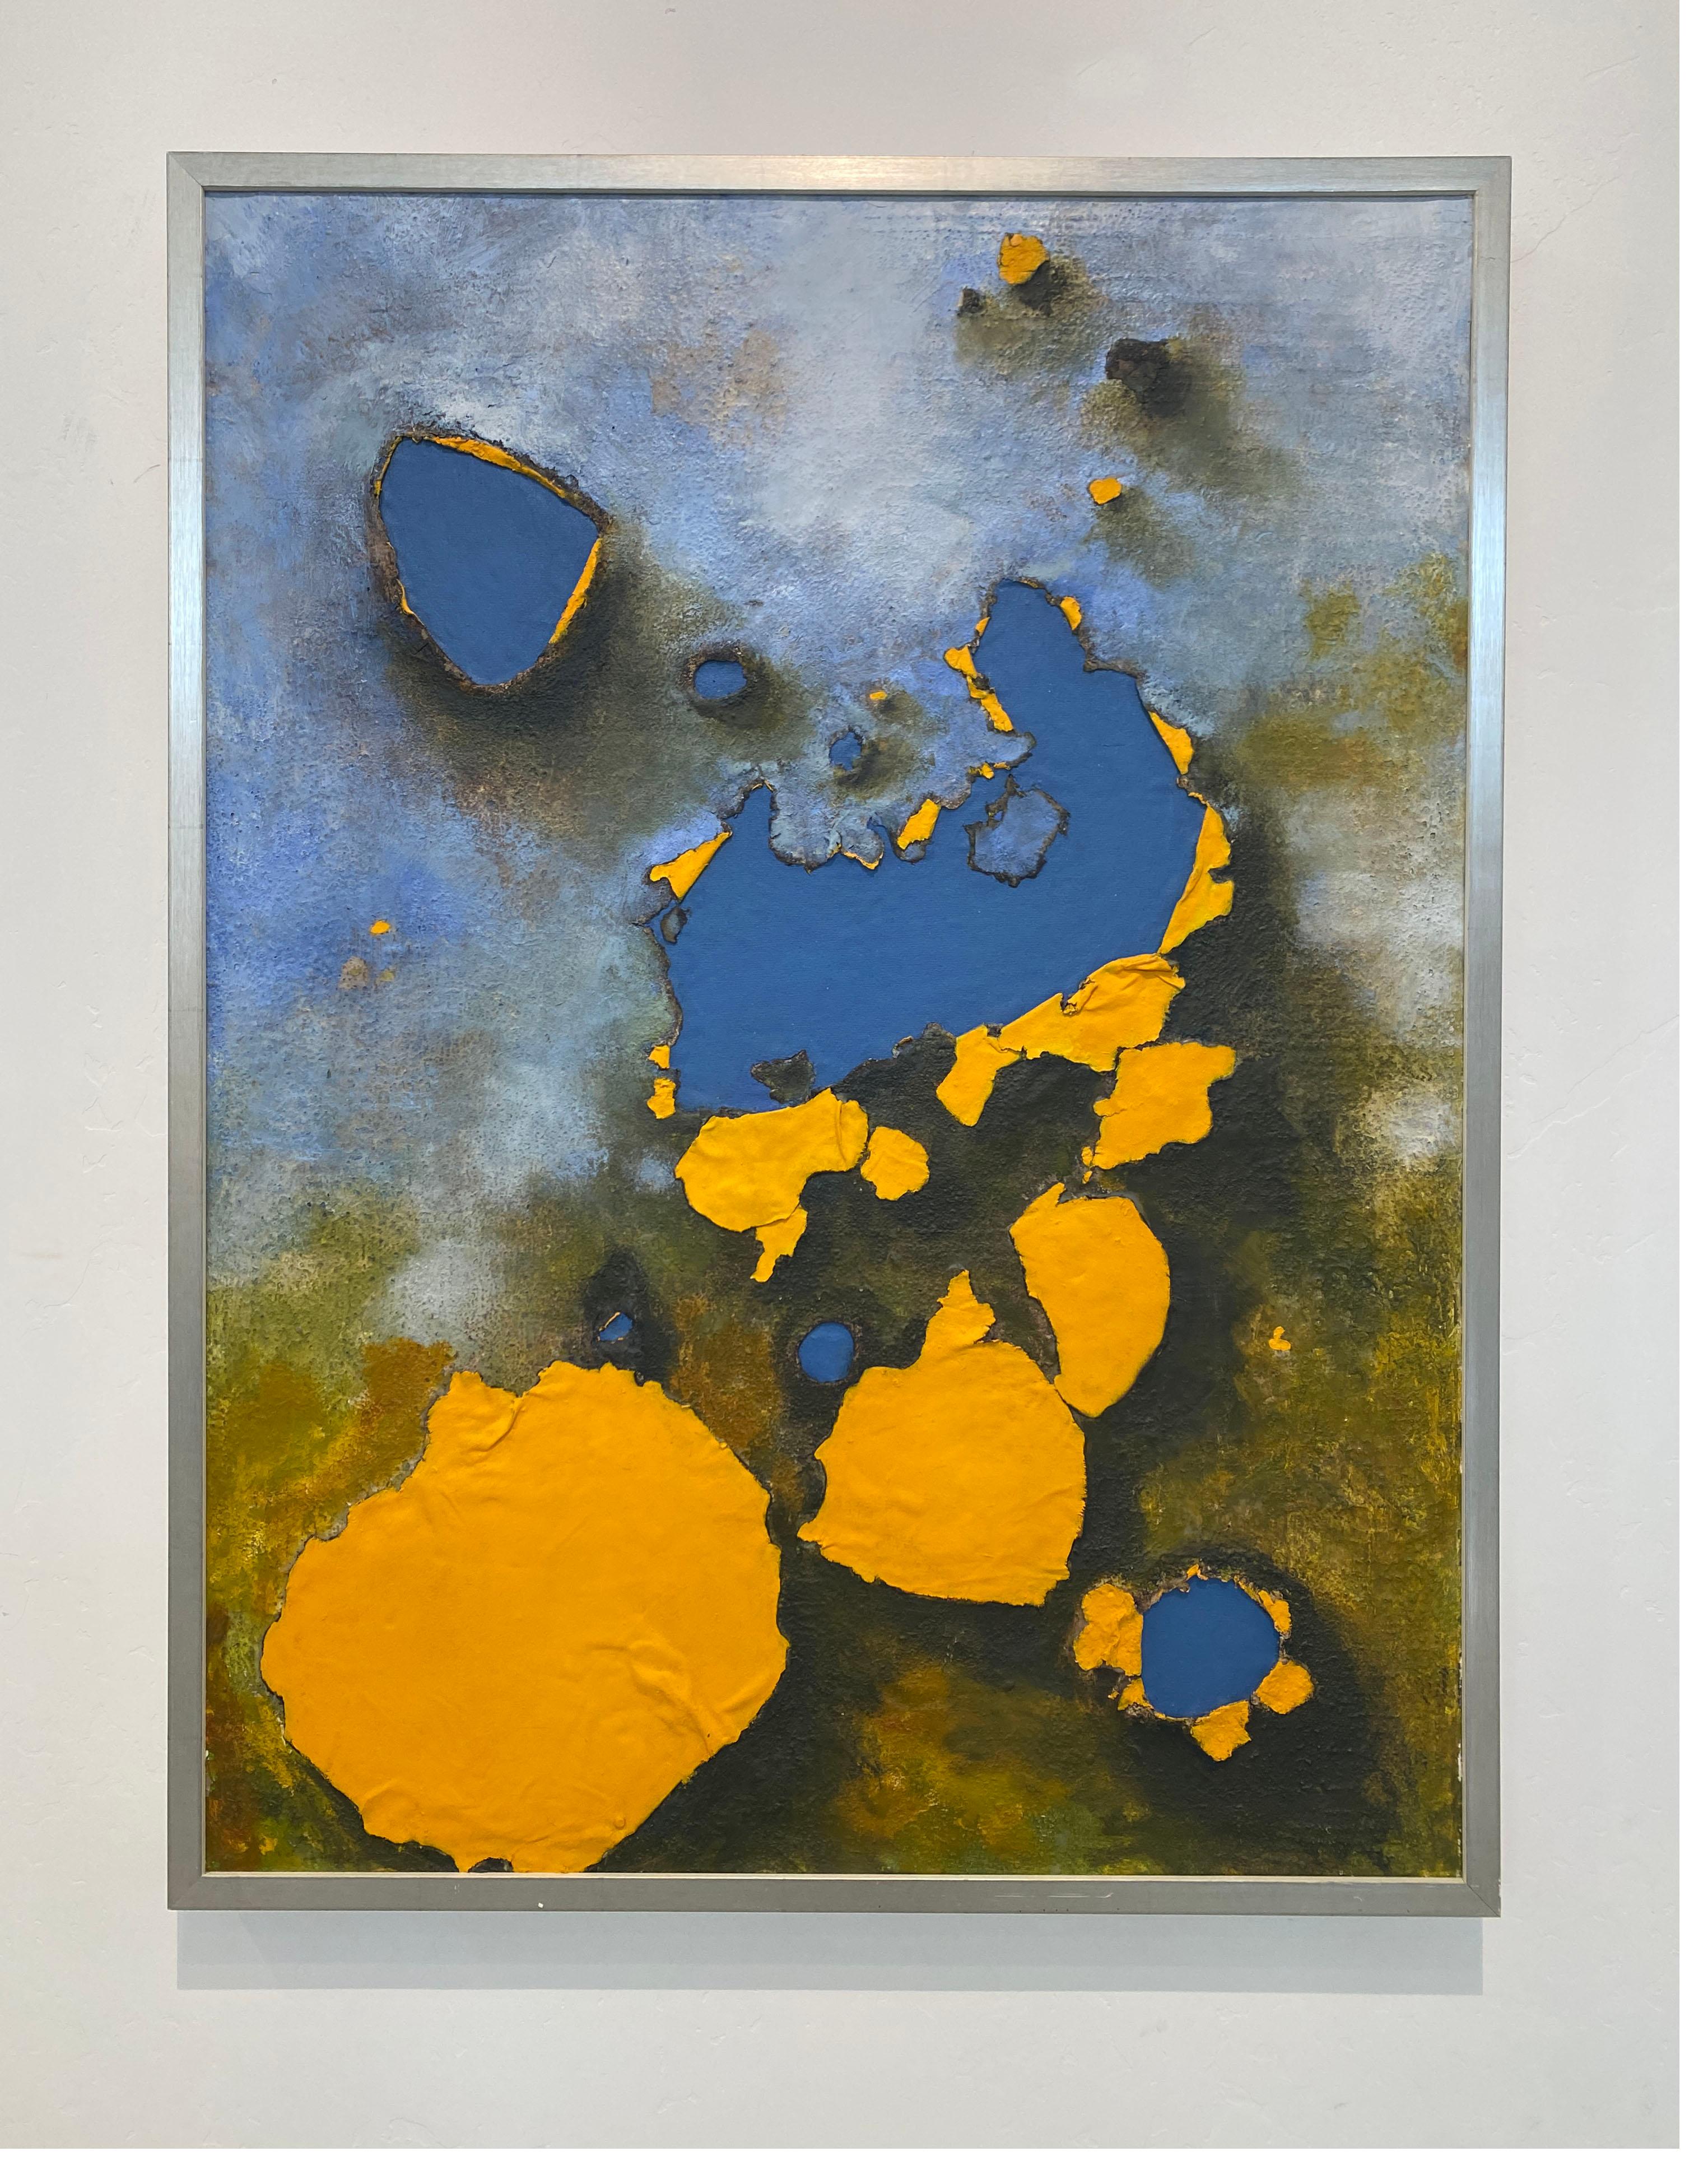 Blasted Through and it's Blue, oil painting, encaustic, abstract blue and yellow - Painting by Tania Dibbs